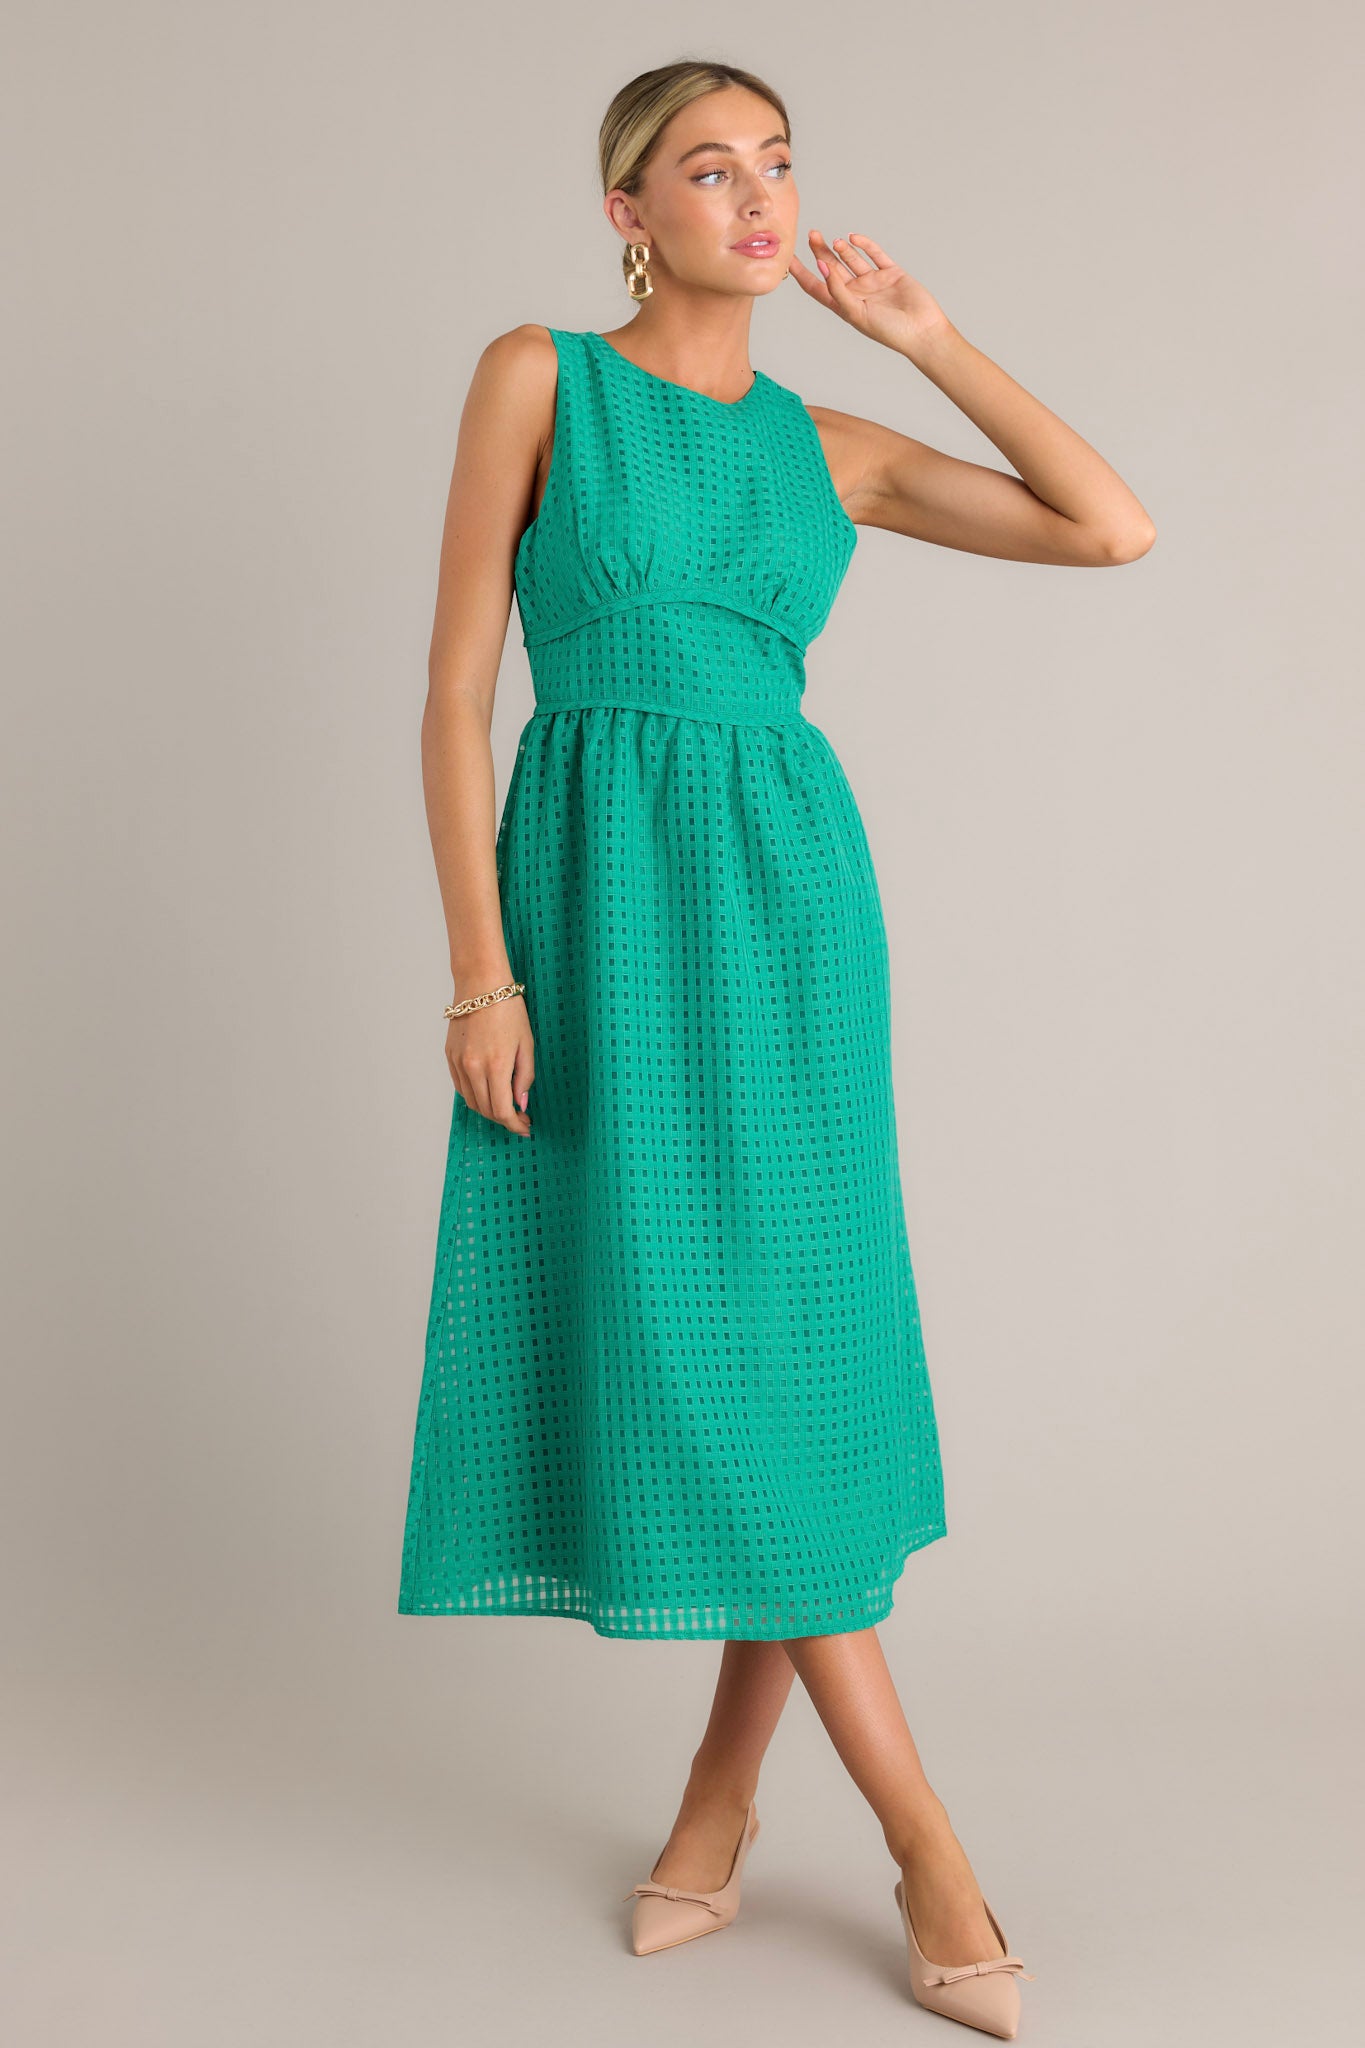 Full length view of a green midi dress with a high neckline, a discrete back zipper, a thick waistband, a grid-like pattern, and a sleeveless design